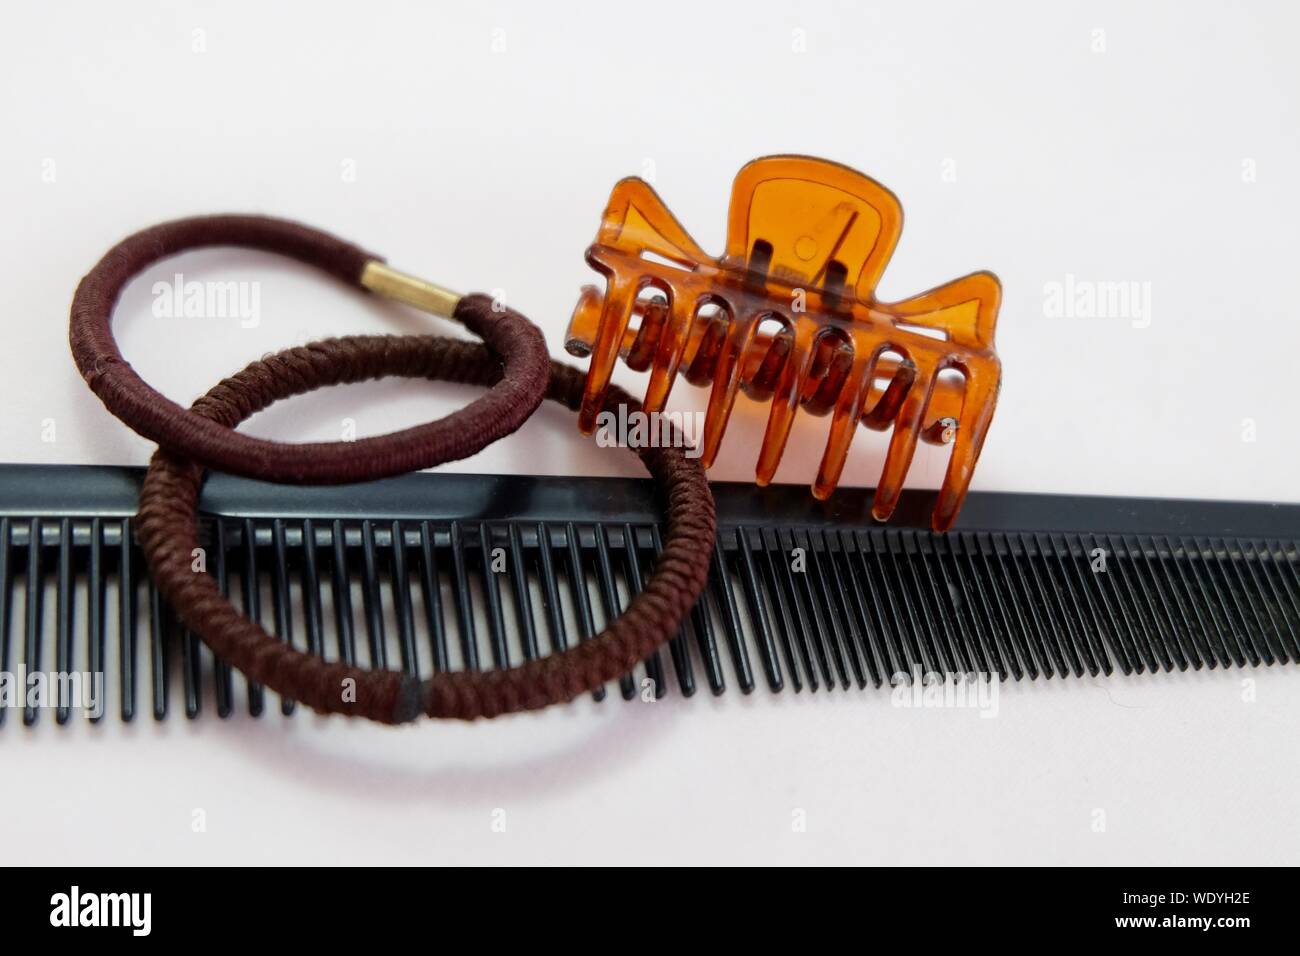 Close-up Of Comb With Hair Clip And Rubber Bands On White Background Stock Photo